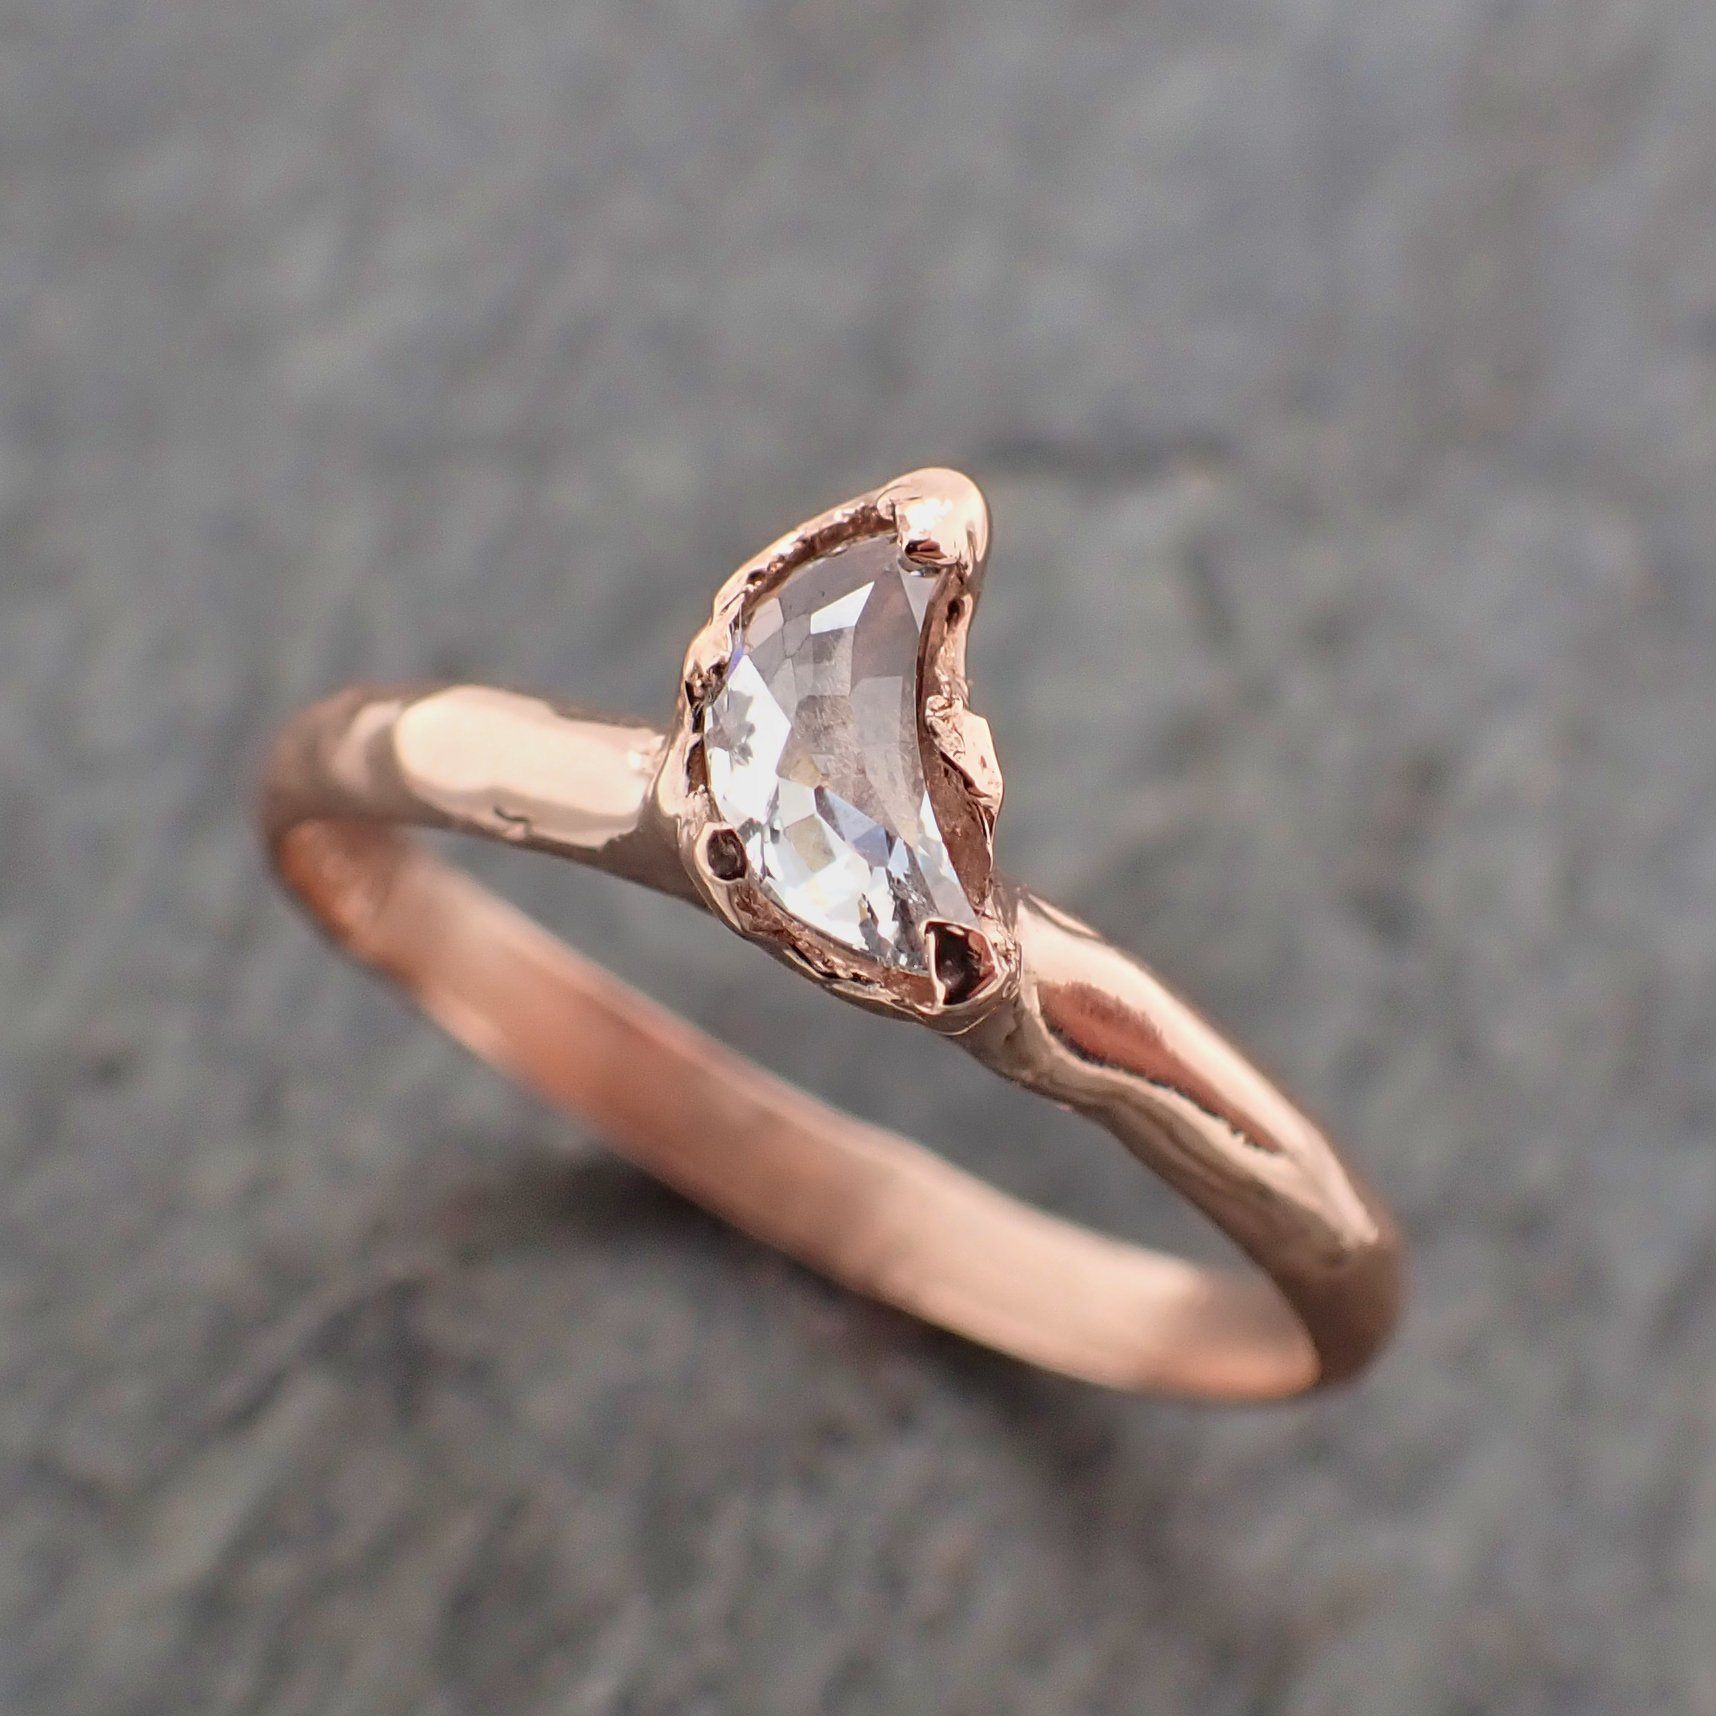 Faceted Fancy cut white crescent Moon Diamond Engagement 14k Rose Gold Solitaire Wedding Ring byAngeline 2202